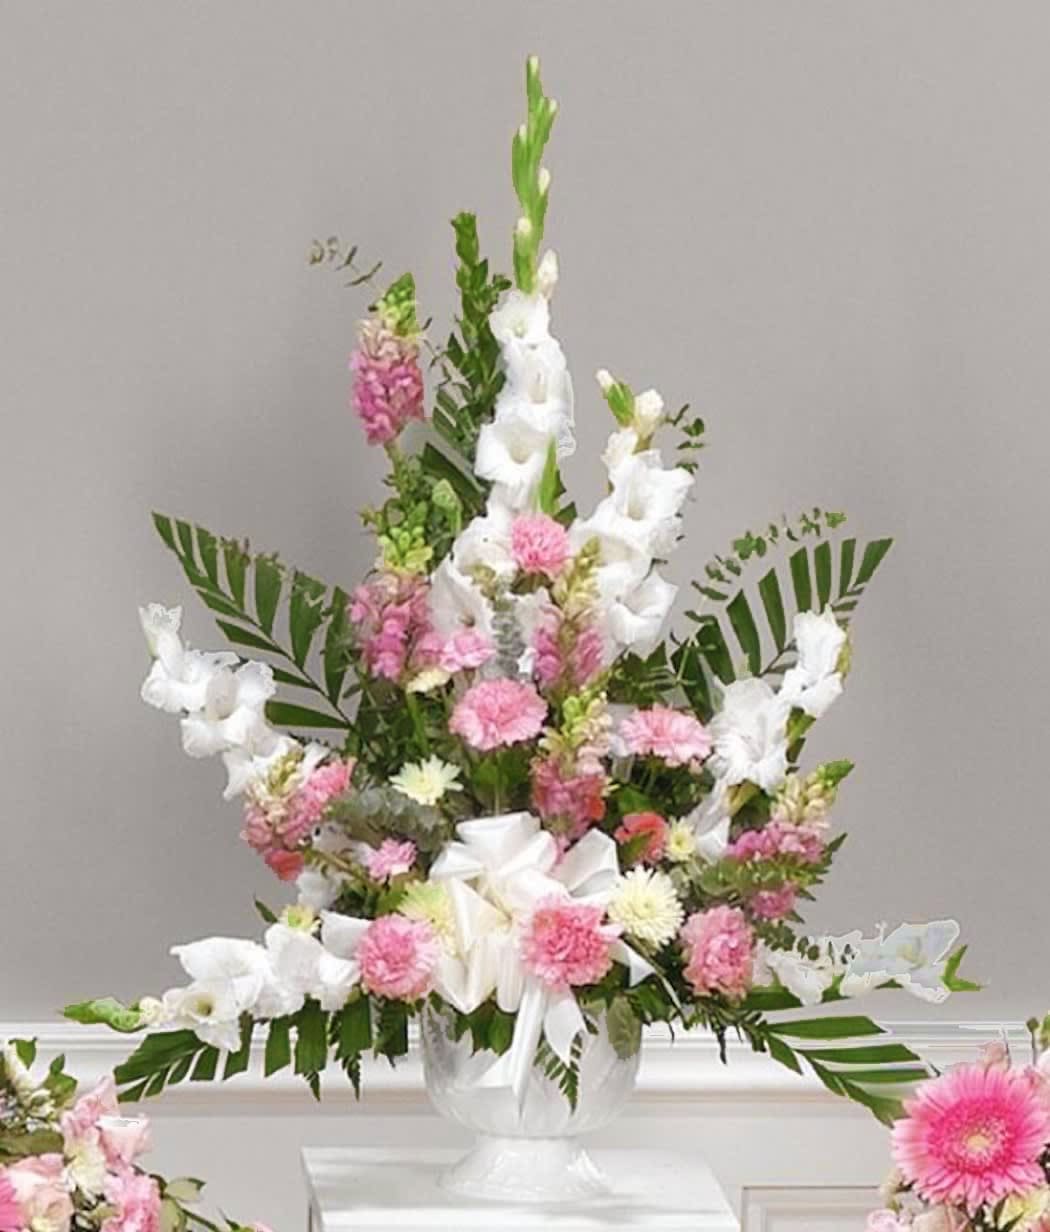 Gladiolus Cascade - White Gladiolus cascade from a bouquet of Pink Snapdragons, Carnations and designer greenery in this pedestal arrangement.